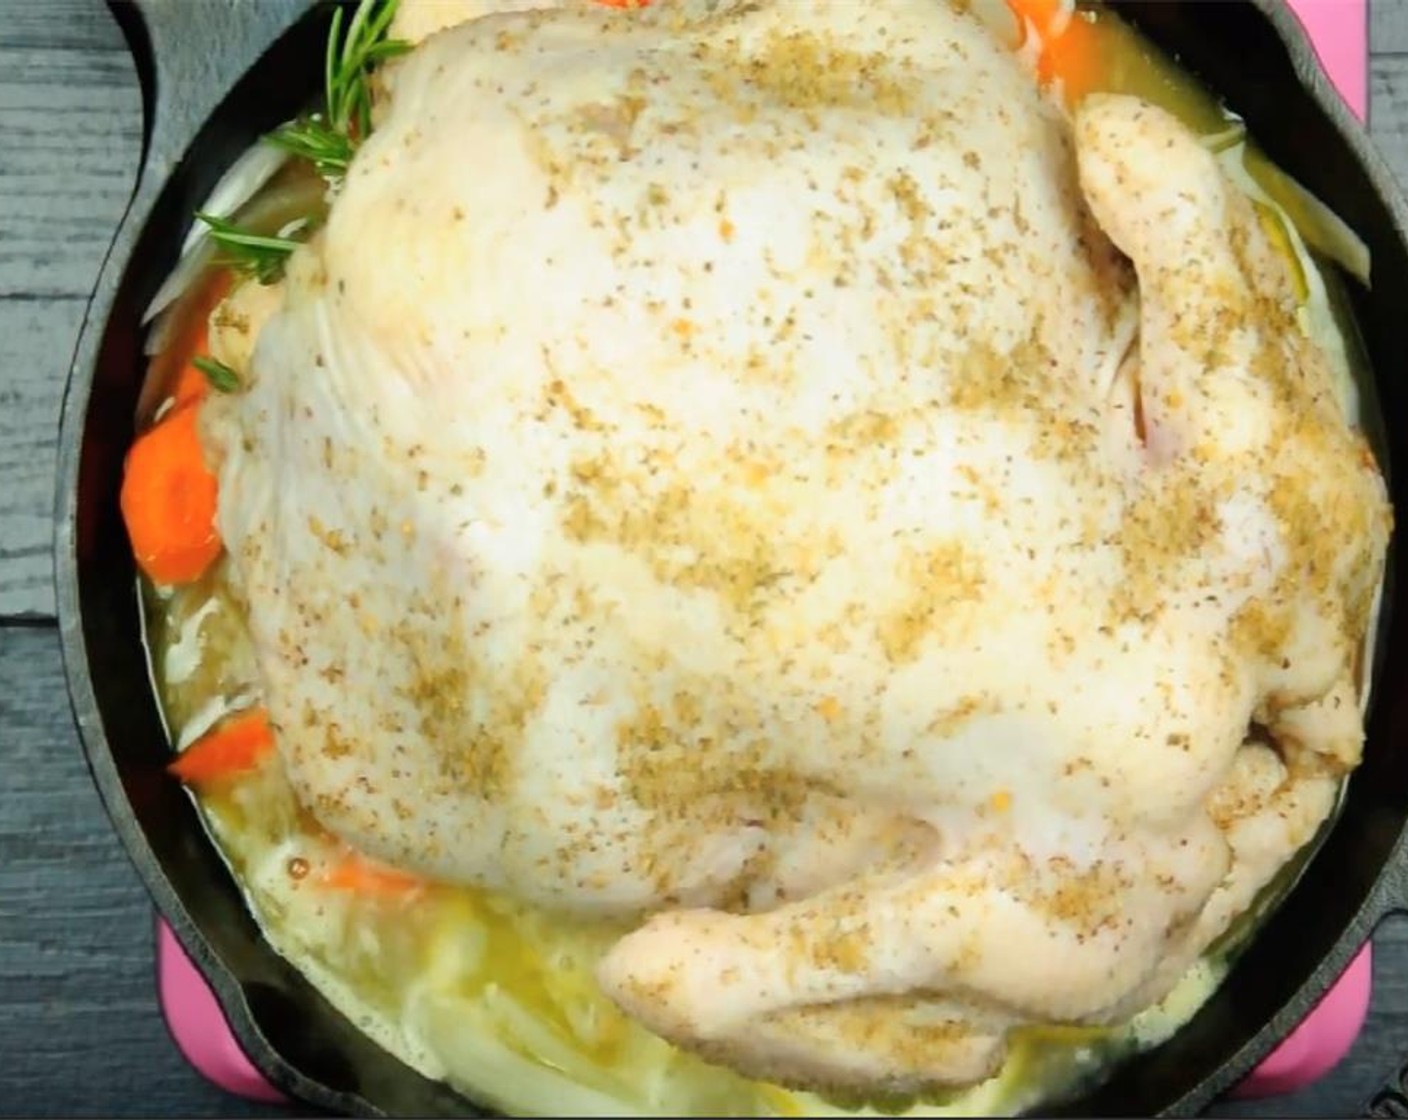 step 6 Bake for 1.5 hours to 2 hours until chicken is completely cooked through and the temperature near the bones reaches 165 degrees F (75 degrees C). Baste the chicken with broth and juices a couple times during the roasting process.